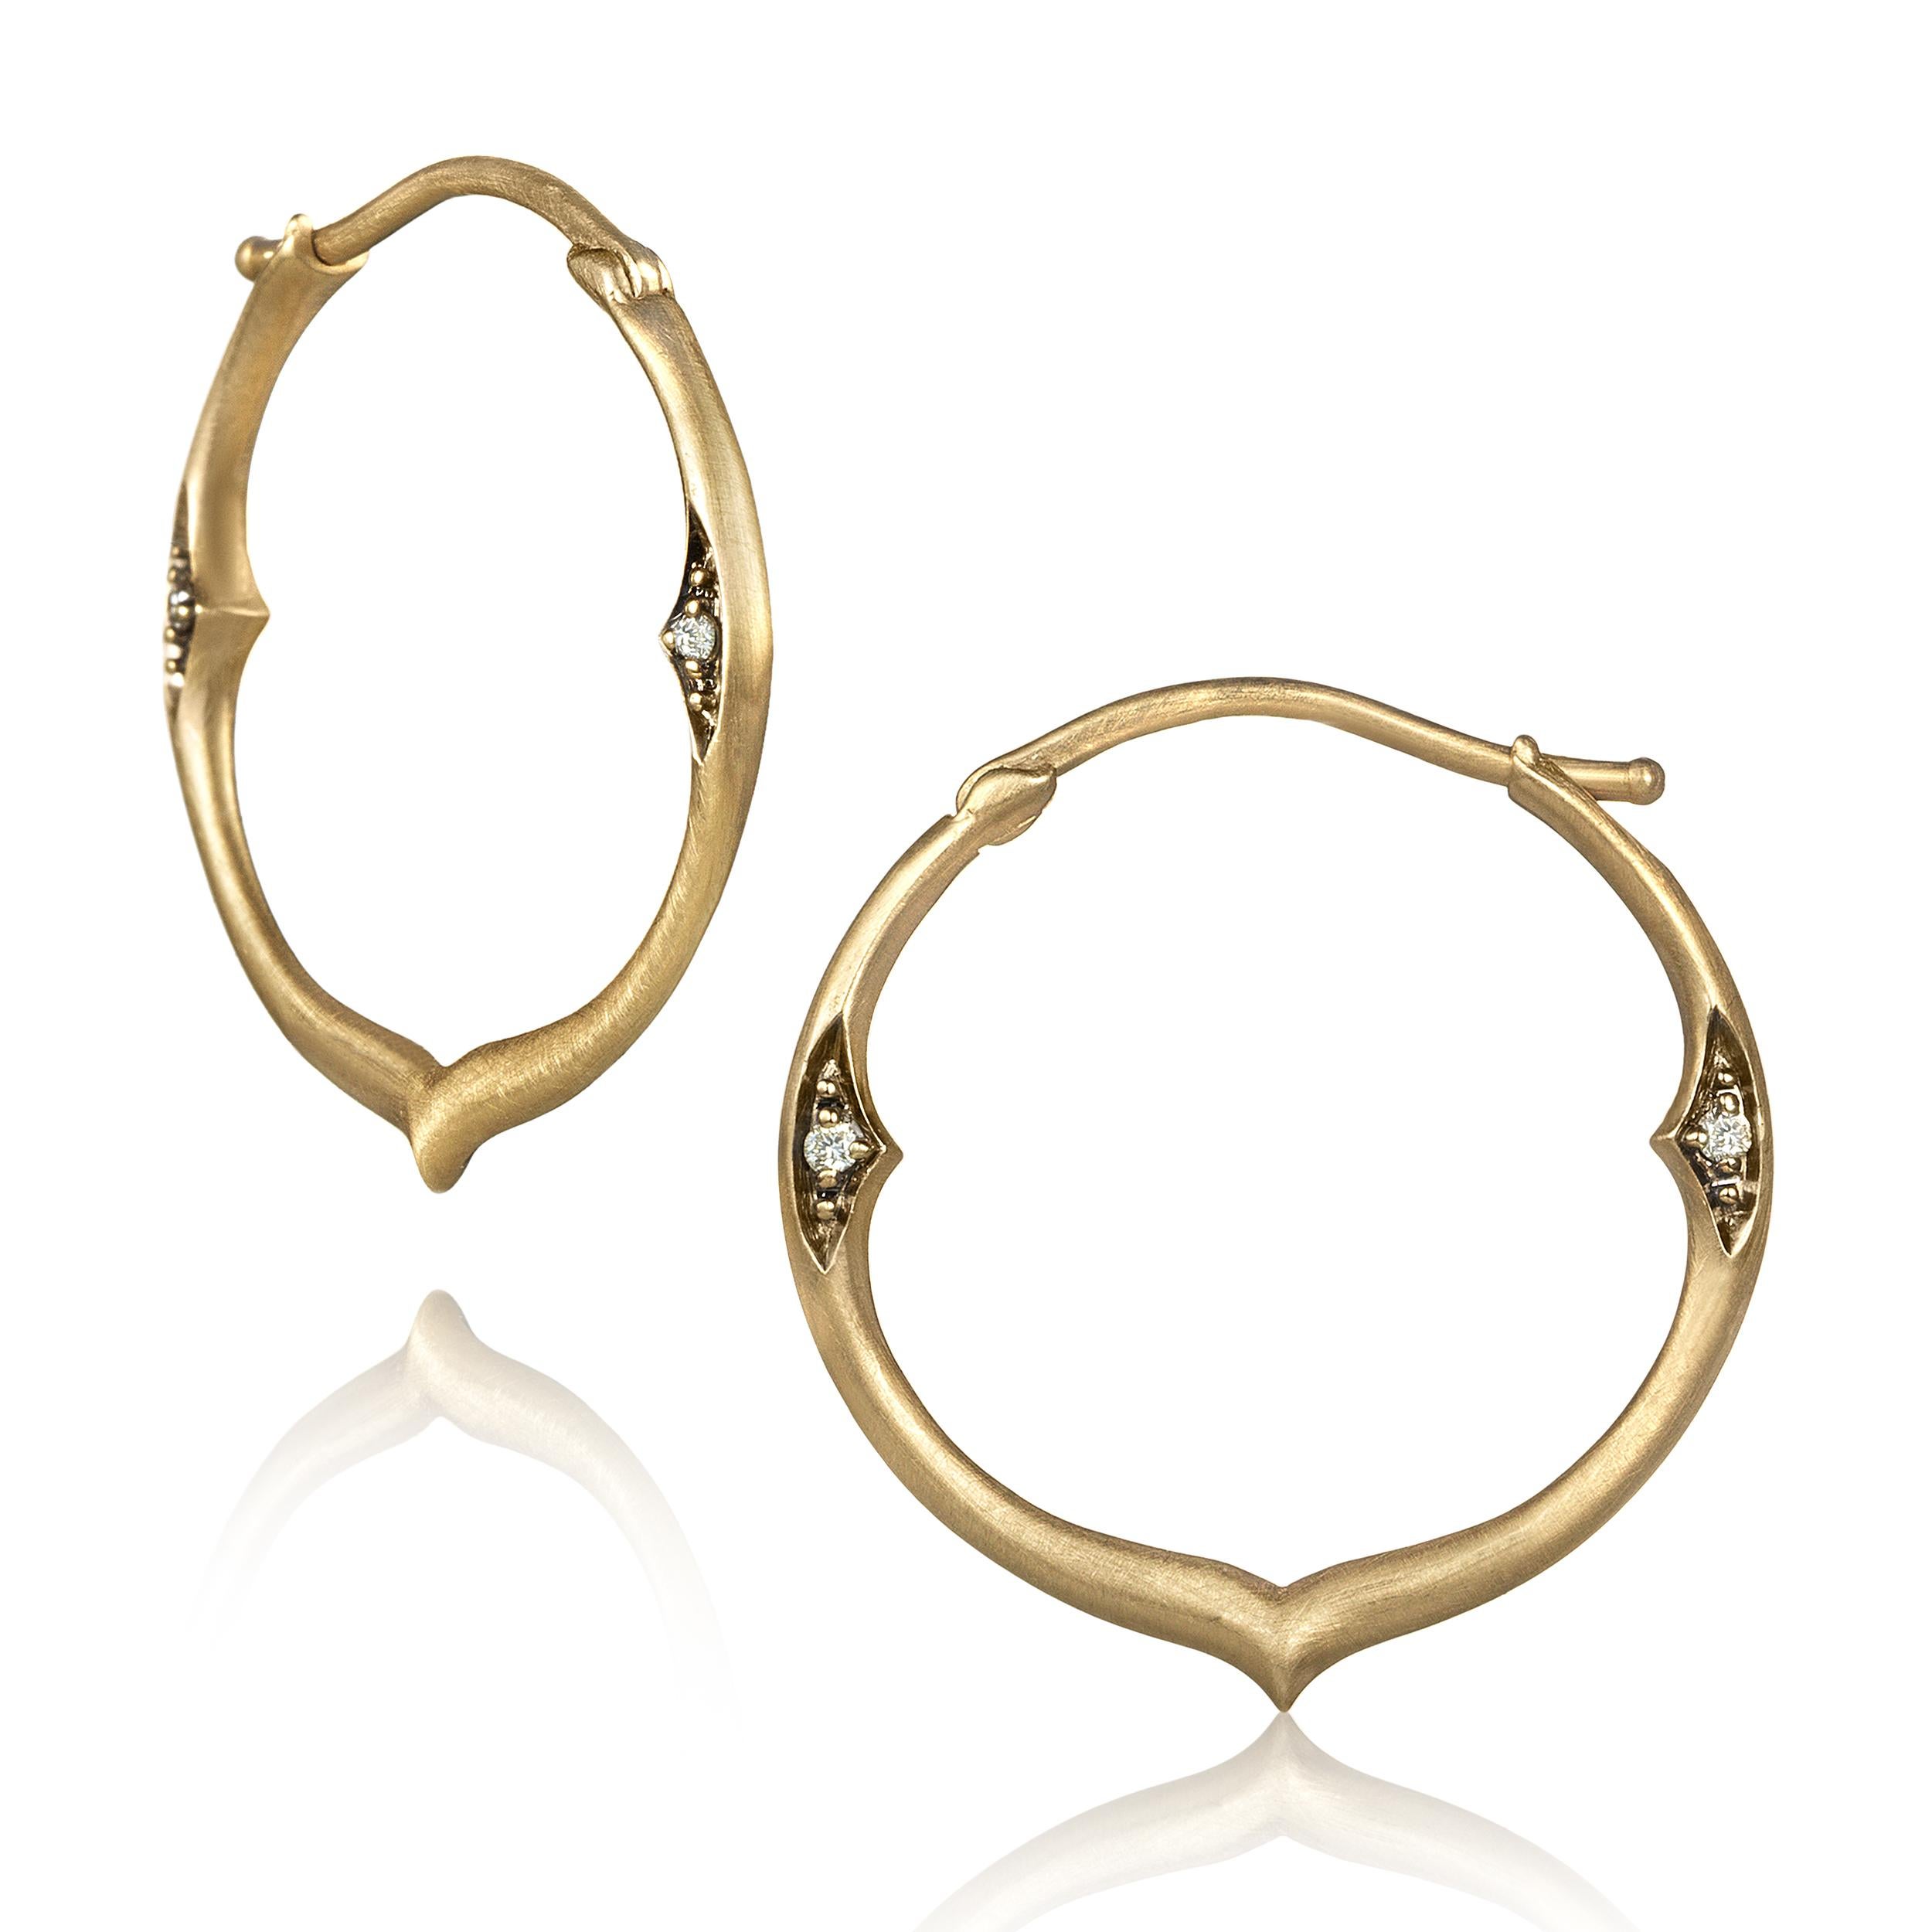 Petite Boho Hoop Earrings handcrafted by jewelry artist Anahita in matte-finished 18k yellow gold with champagne diamond accents and a lever-back closure. Stamped and Hallmarked. 18mm diameter.